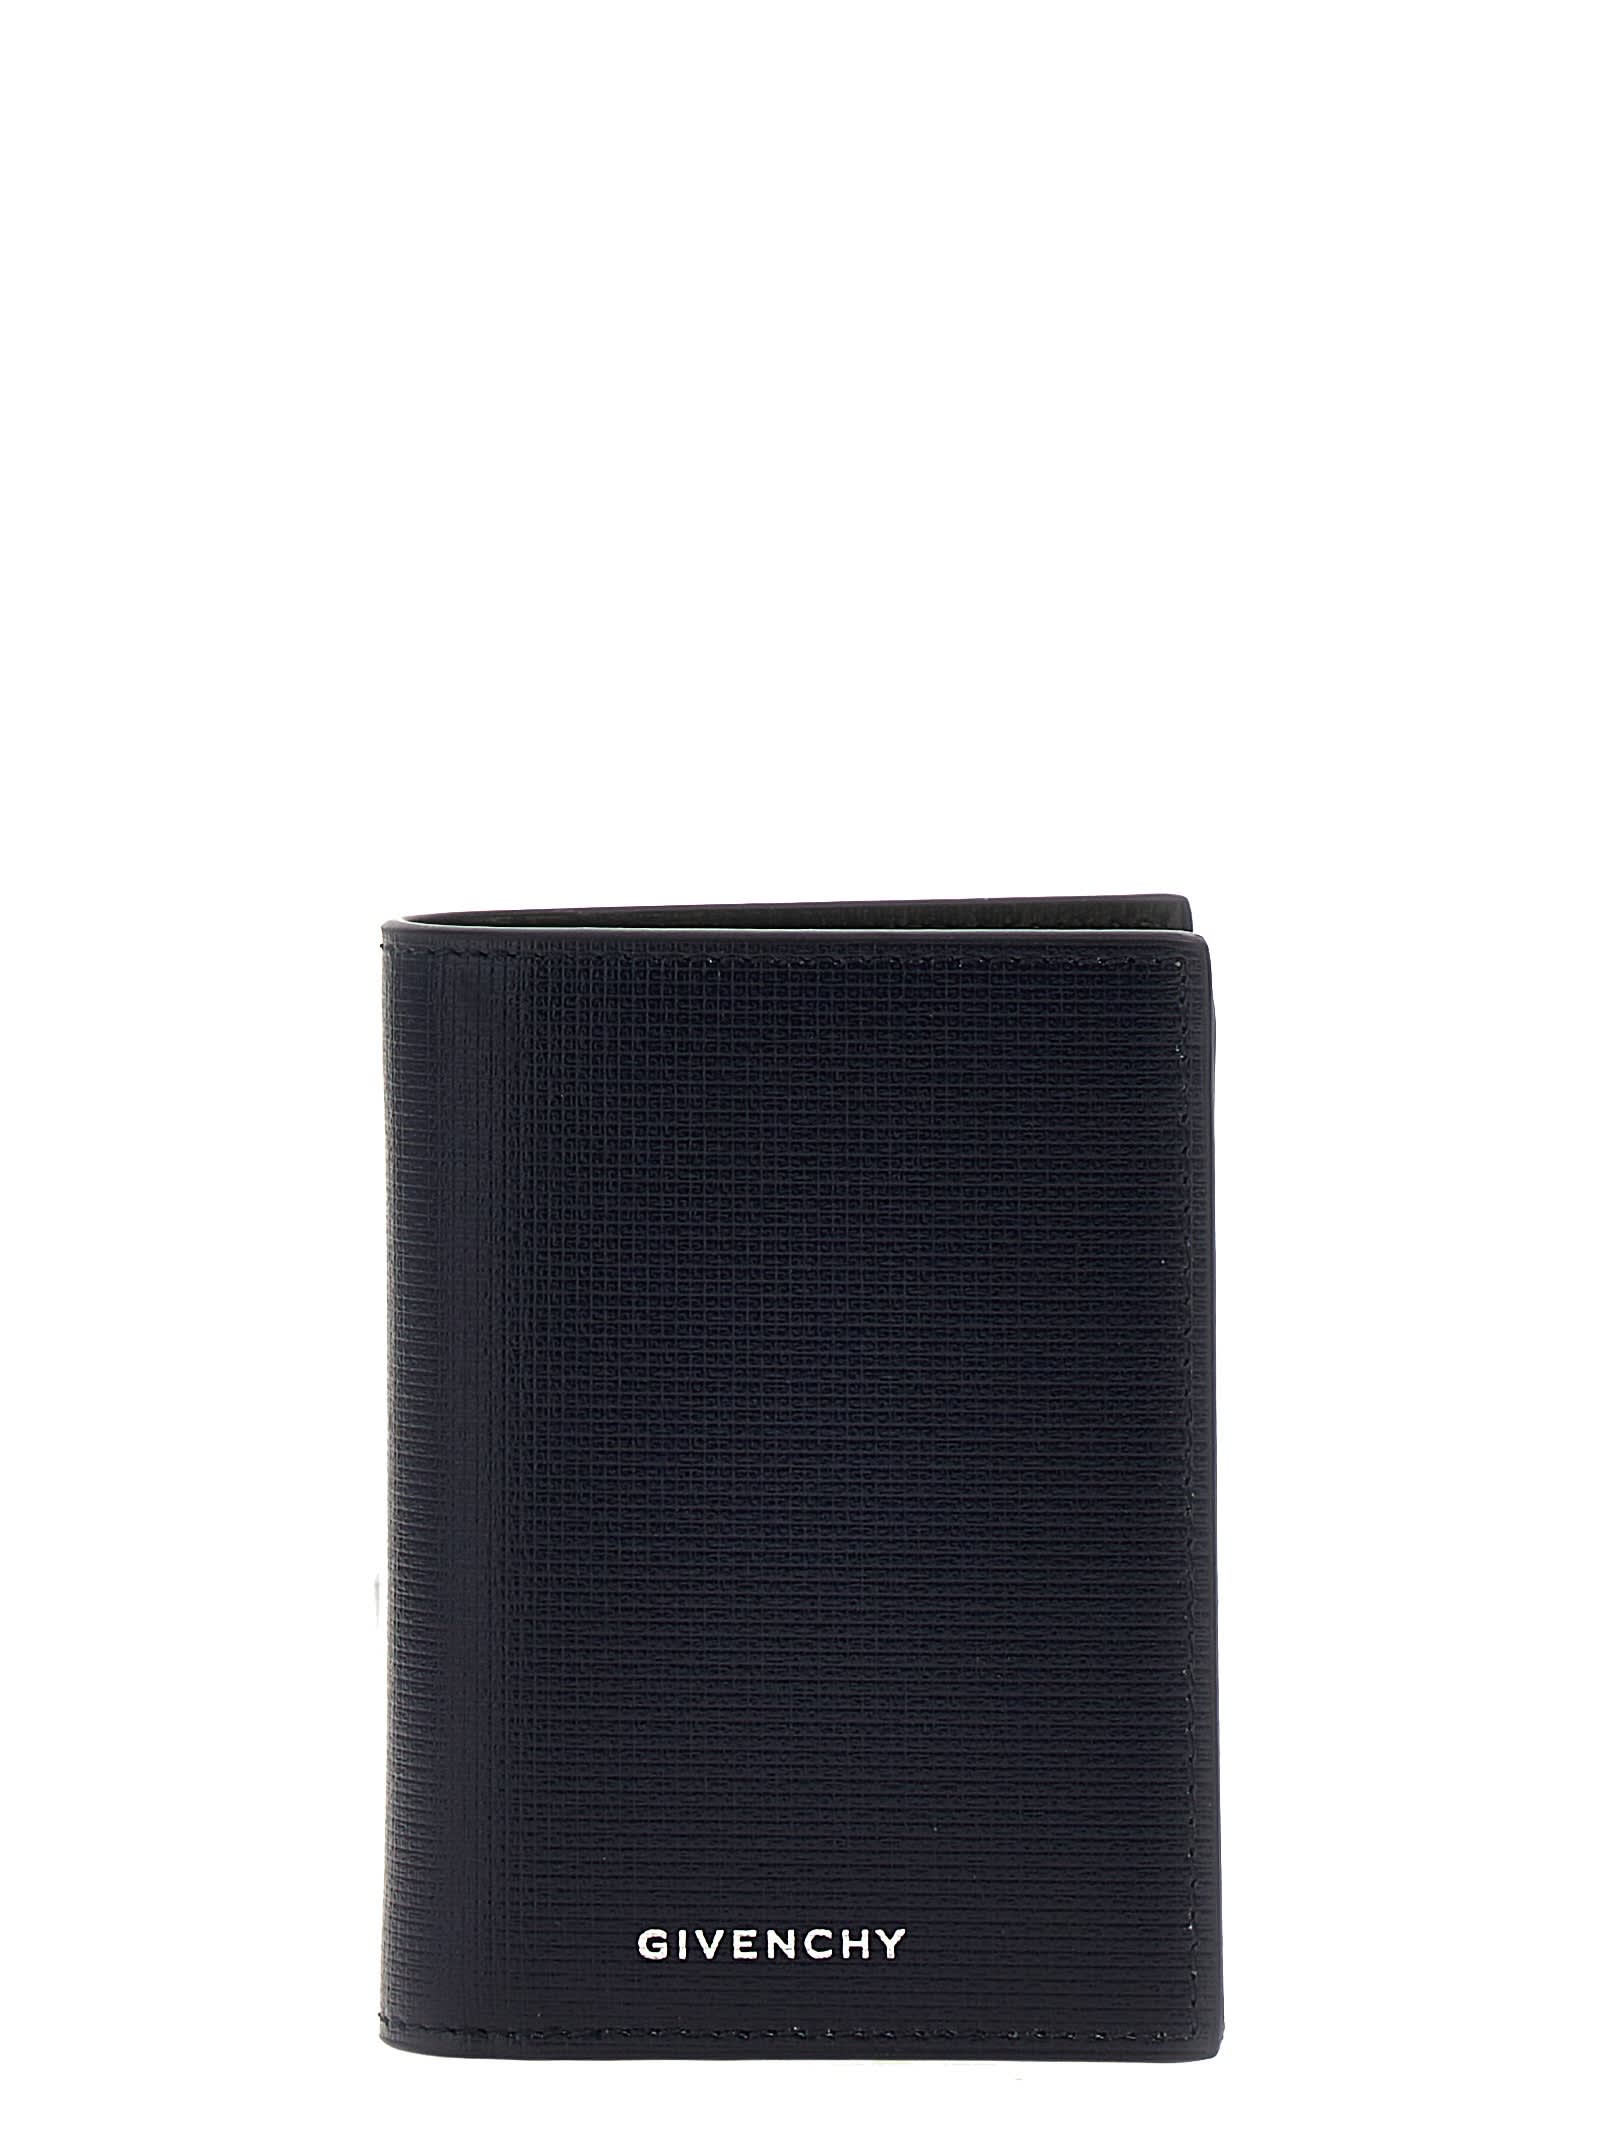 GIVENCHY CLASSIQUE 4G CARD HOLDER